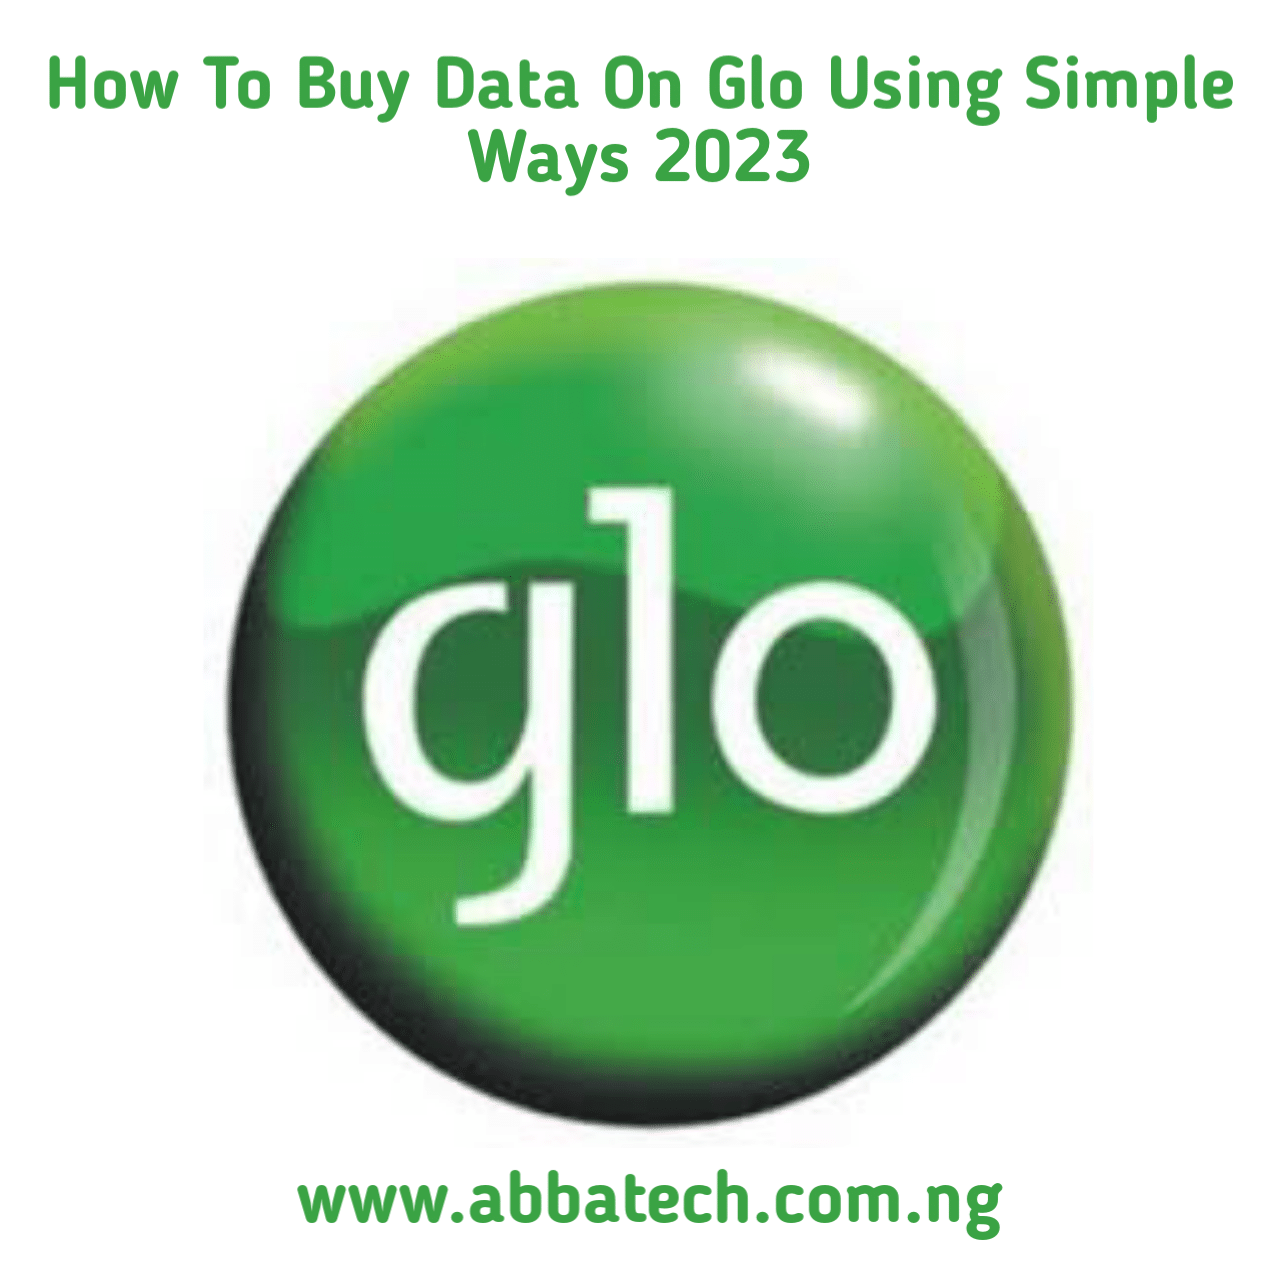 How To Buy Data On Glo Using Simple Ways 2023